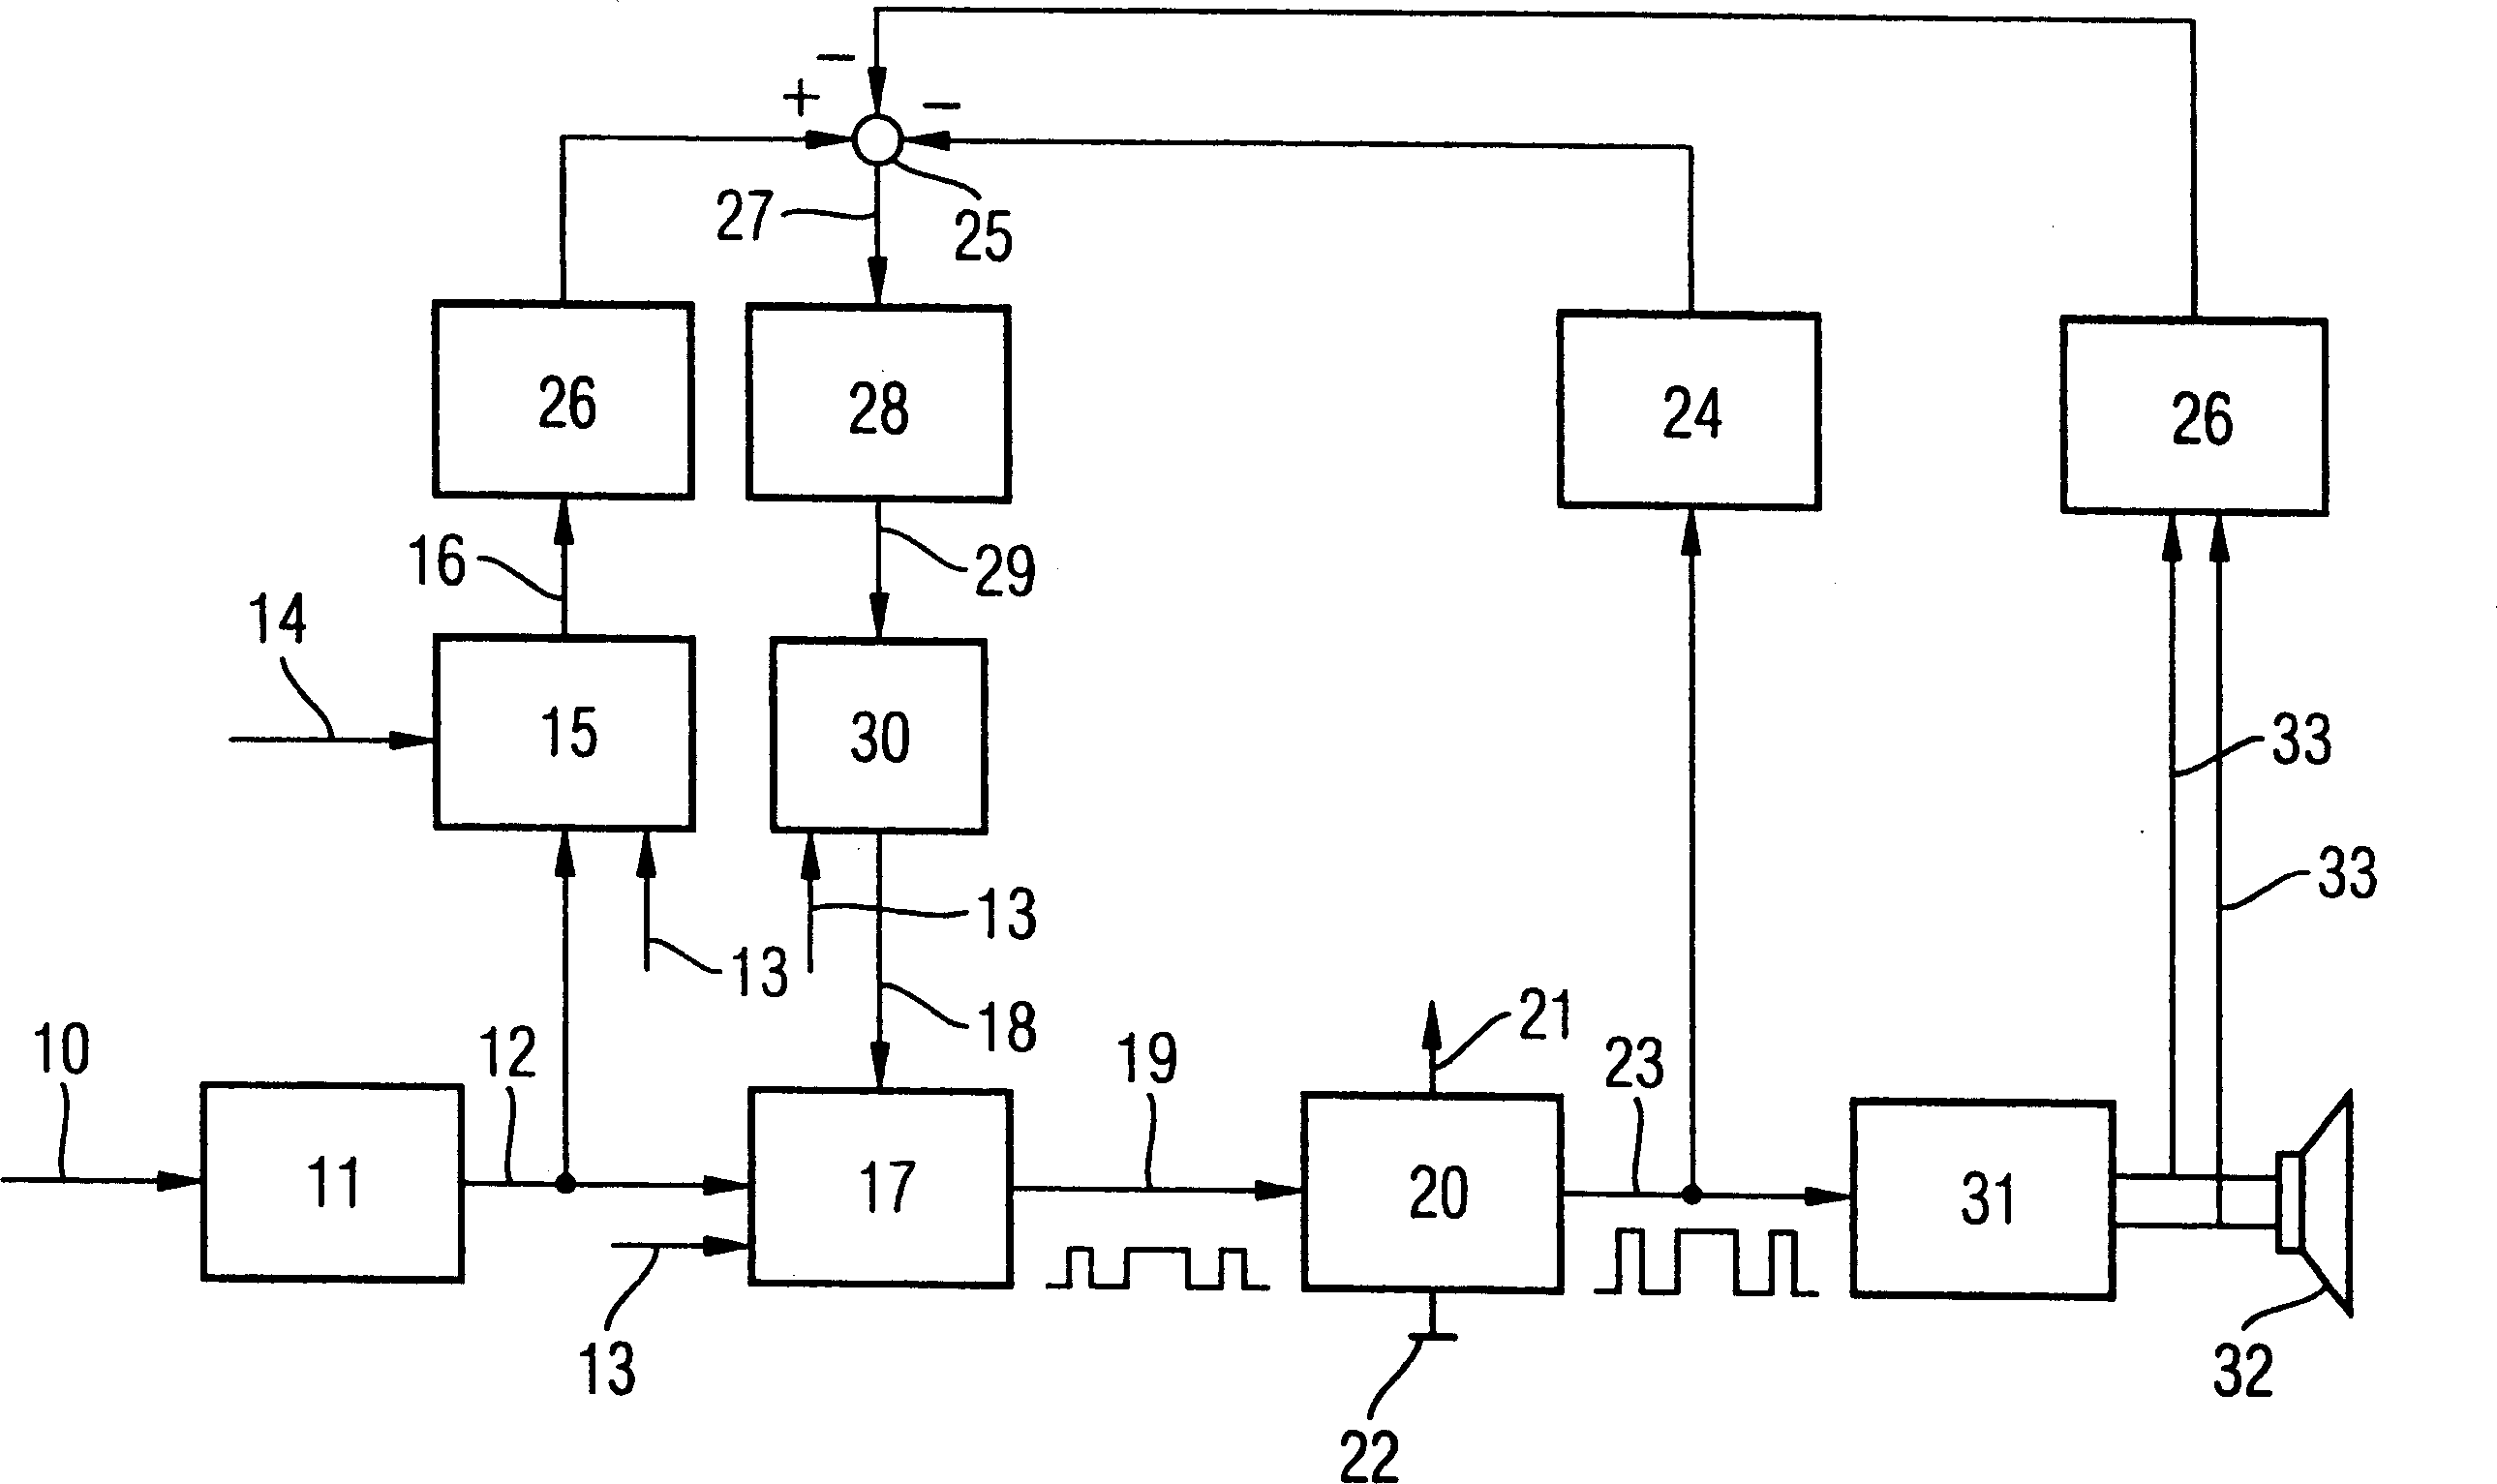 Method and device for correcting signal distortions in an amplifier device